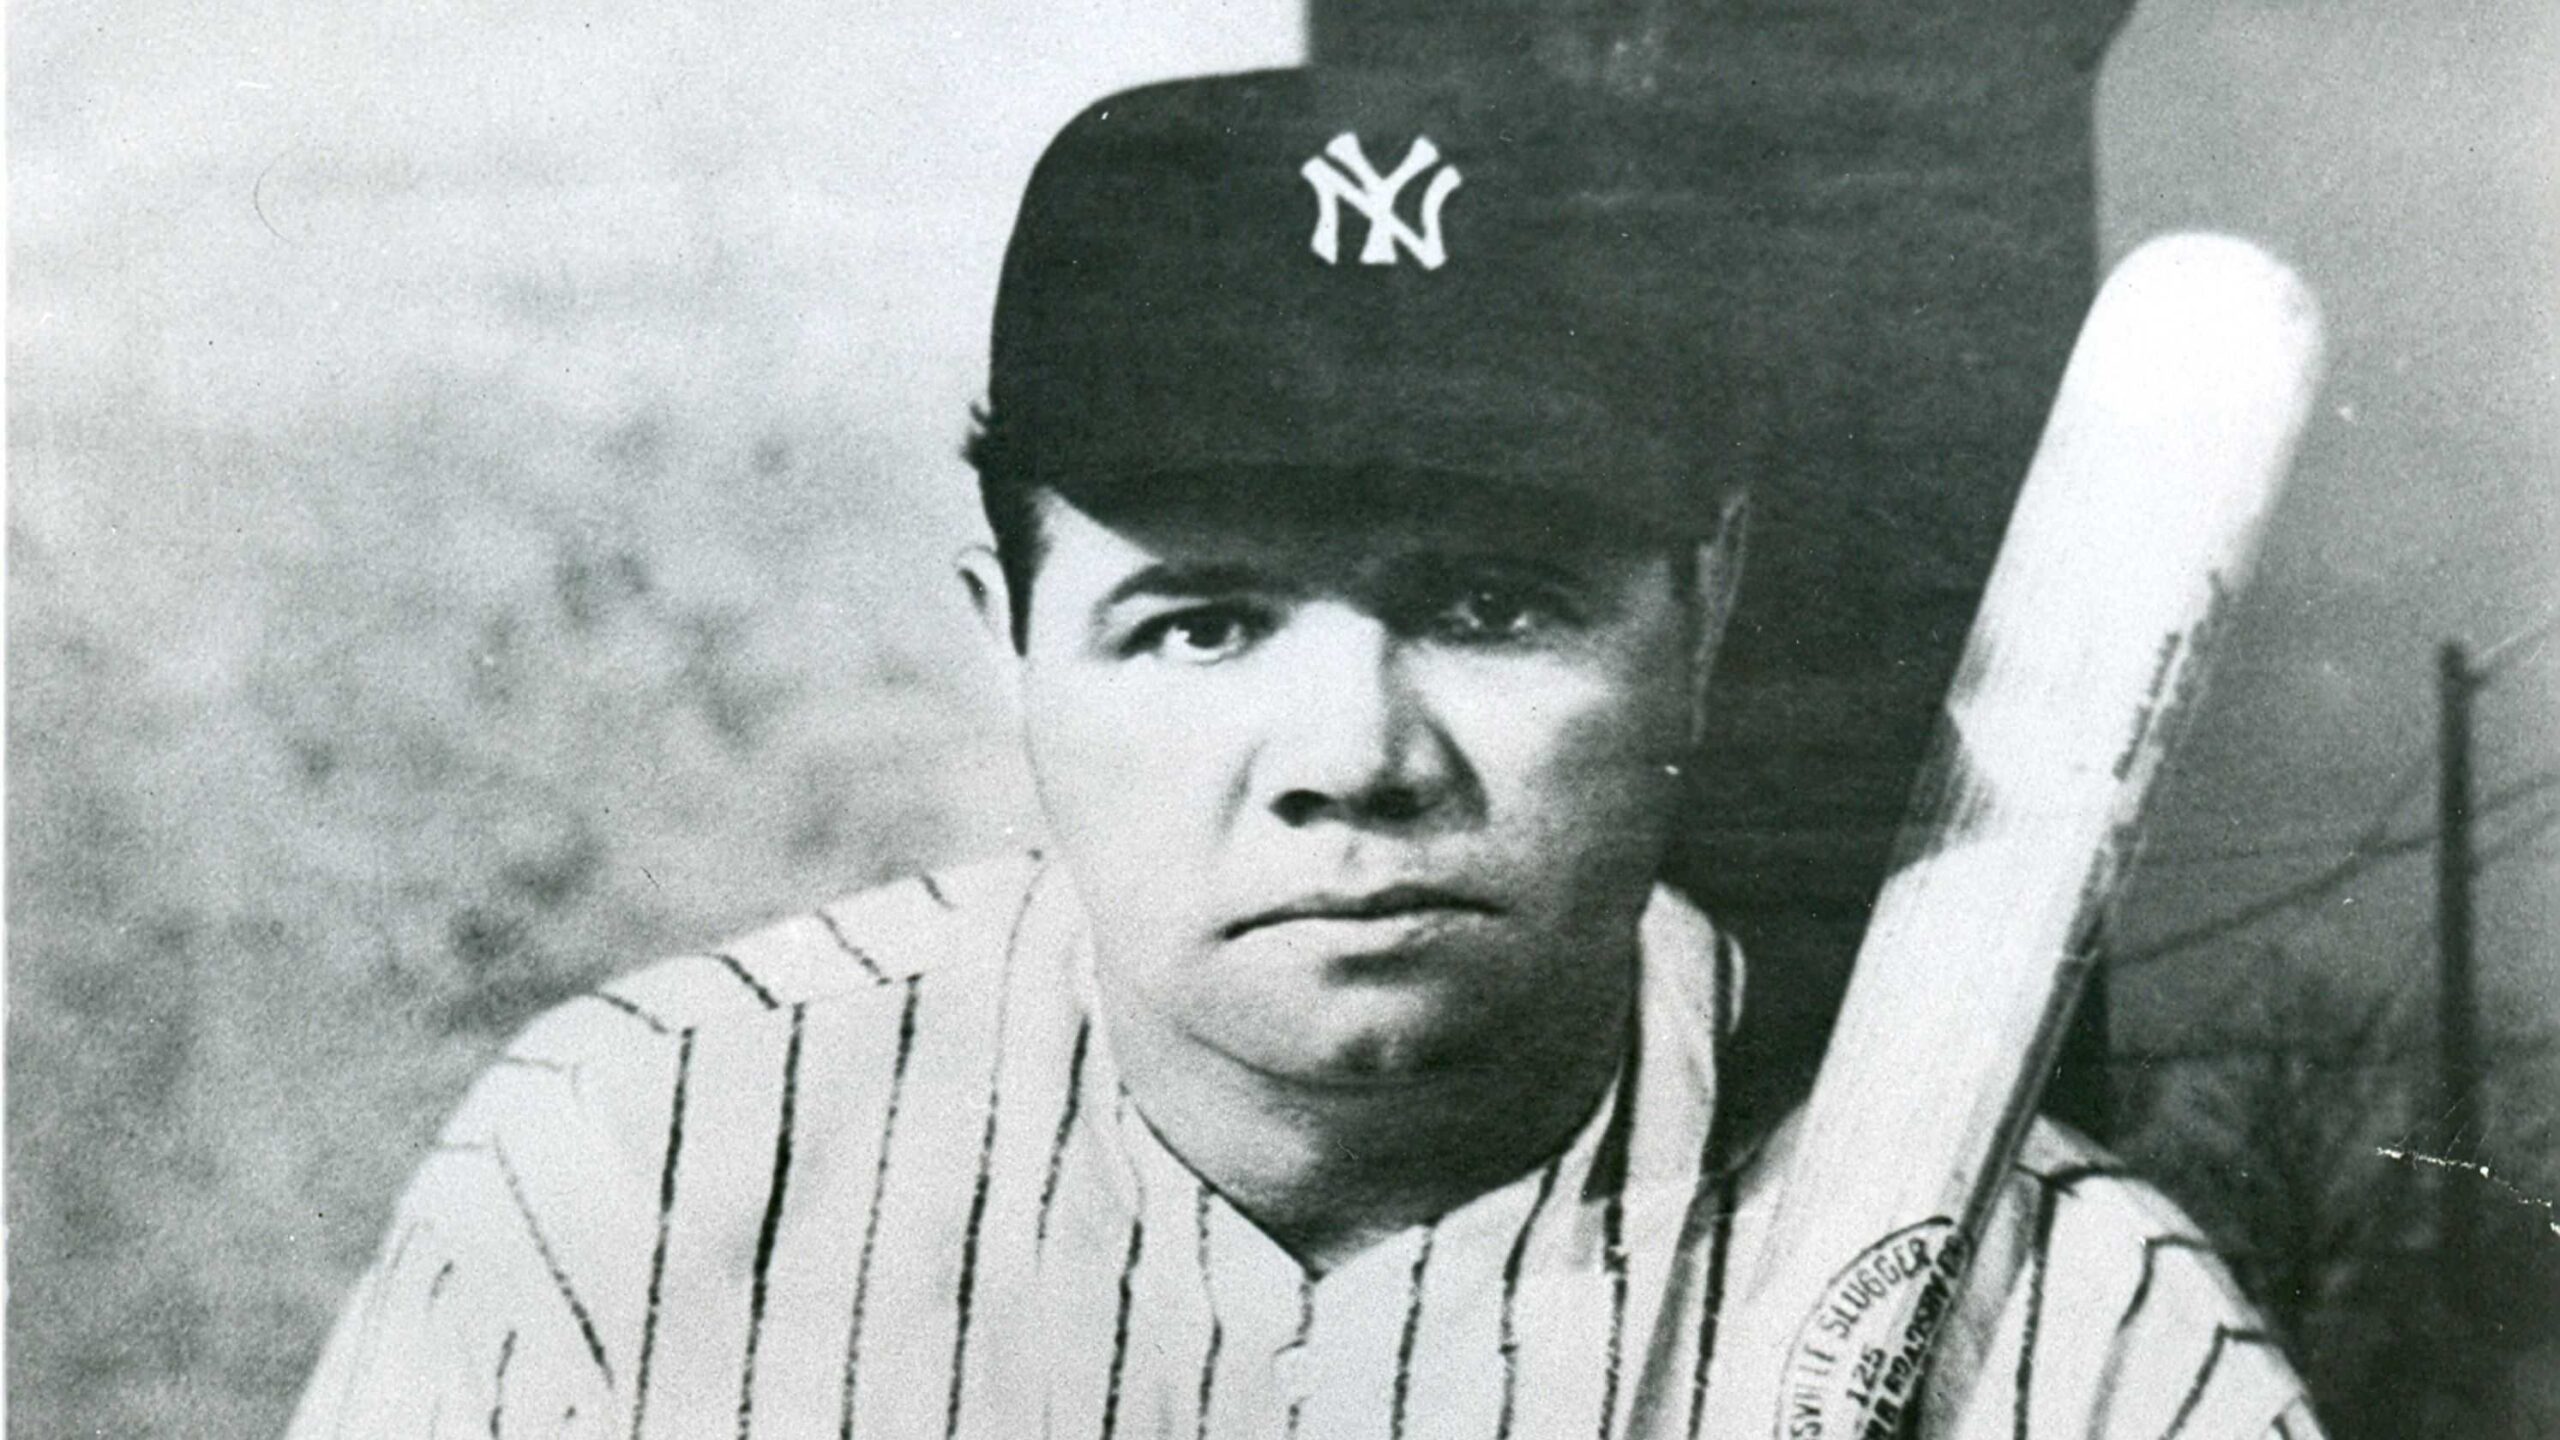  Is Babe Ruth a better athlete than any modern player?